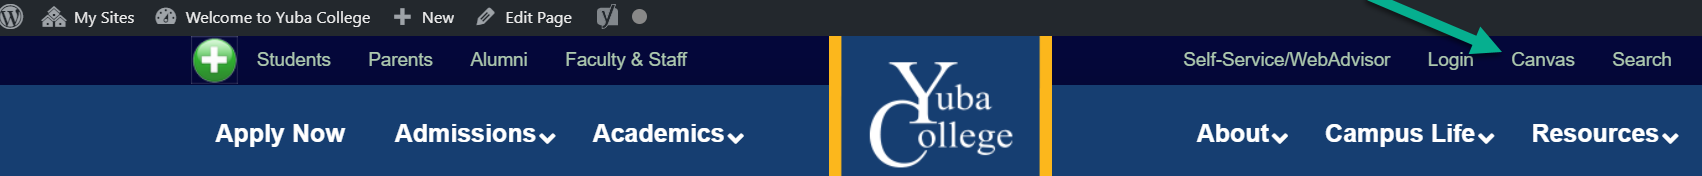 Online Learning Resources for Yuba College - Yuba College